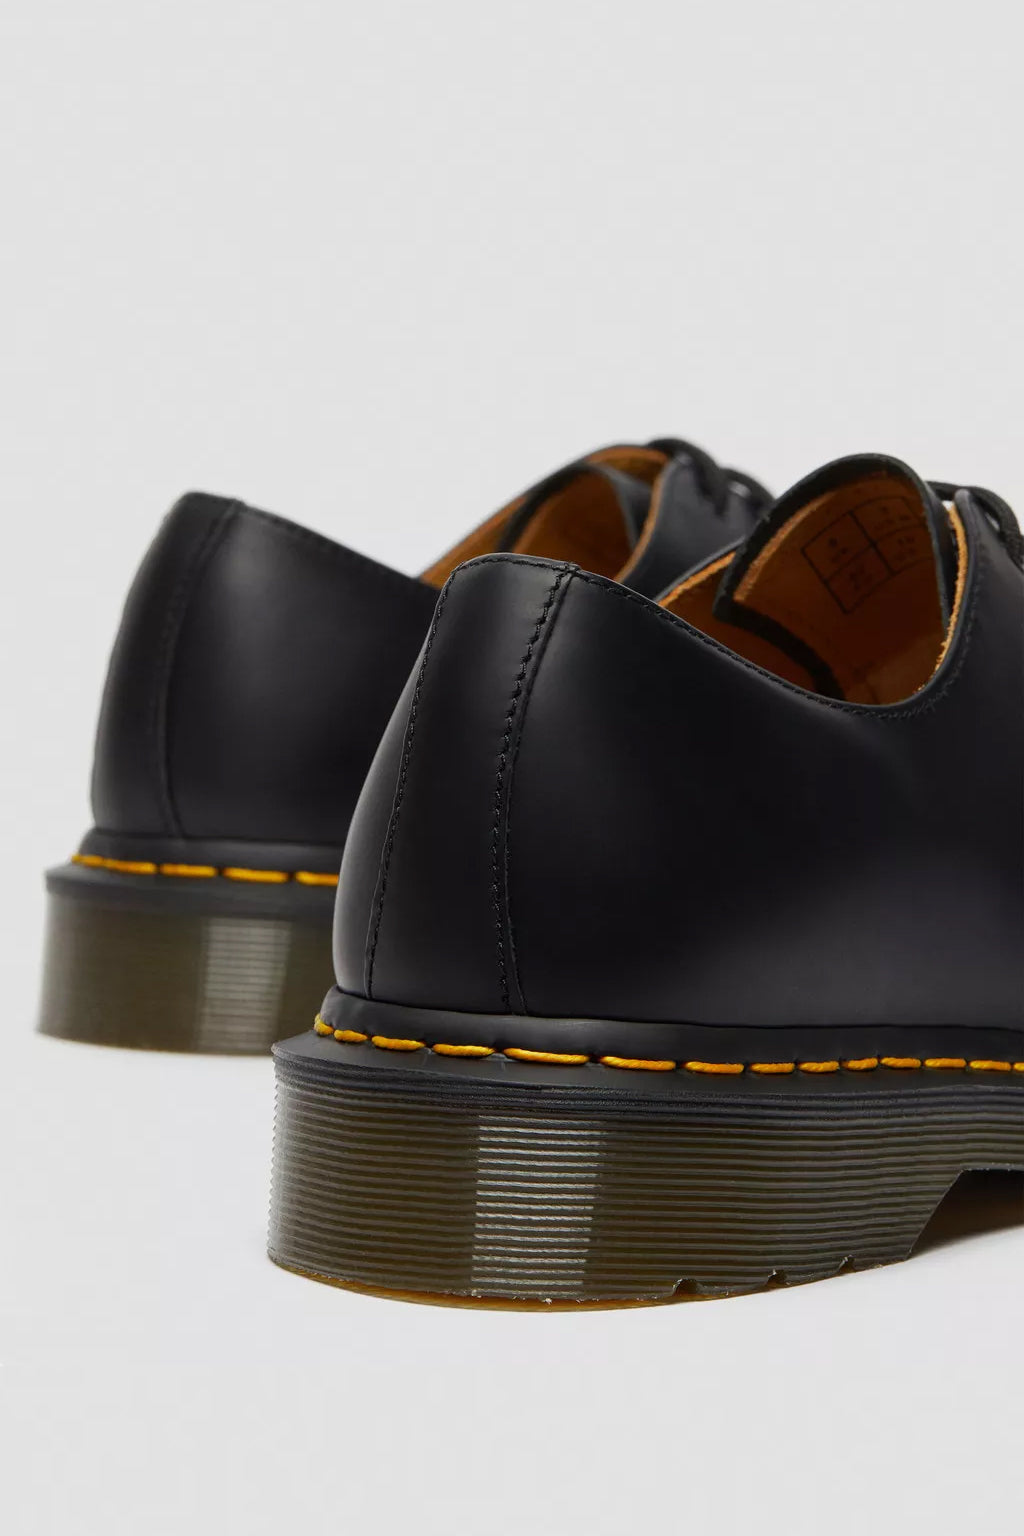 1461 Smooth Leather Oxford Shoes Shoes Dr. Martens   